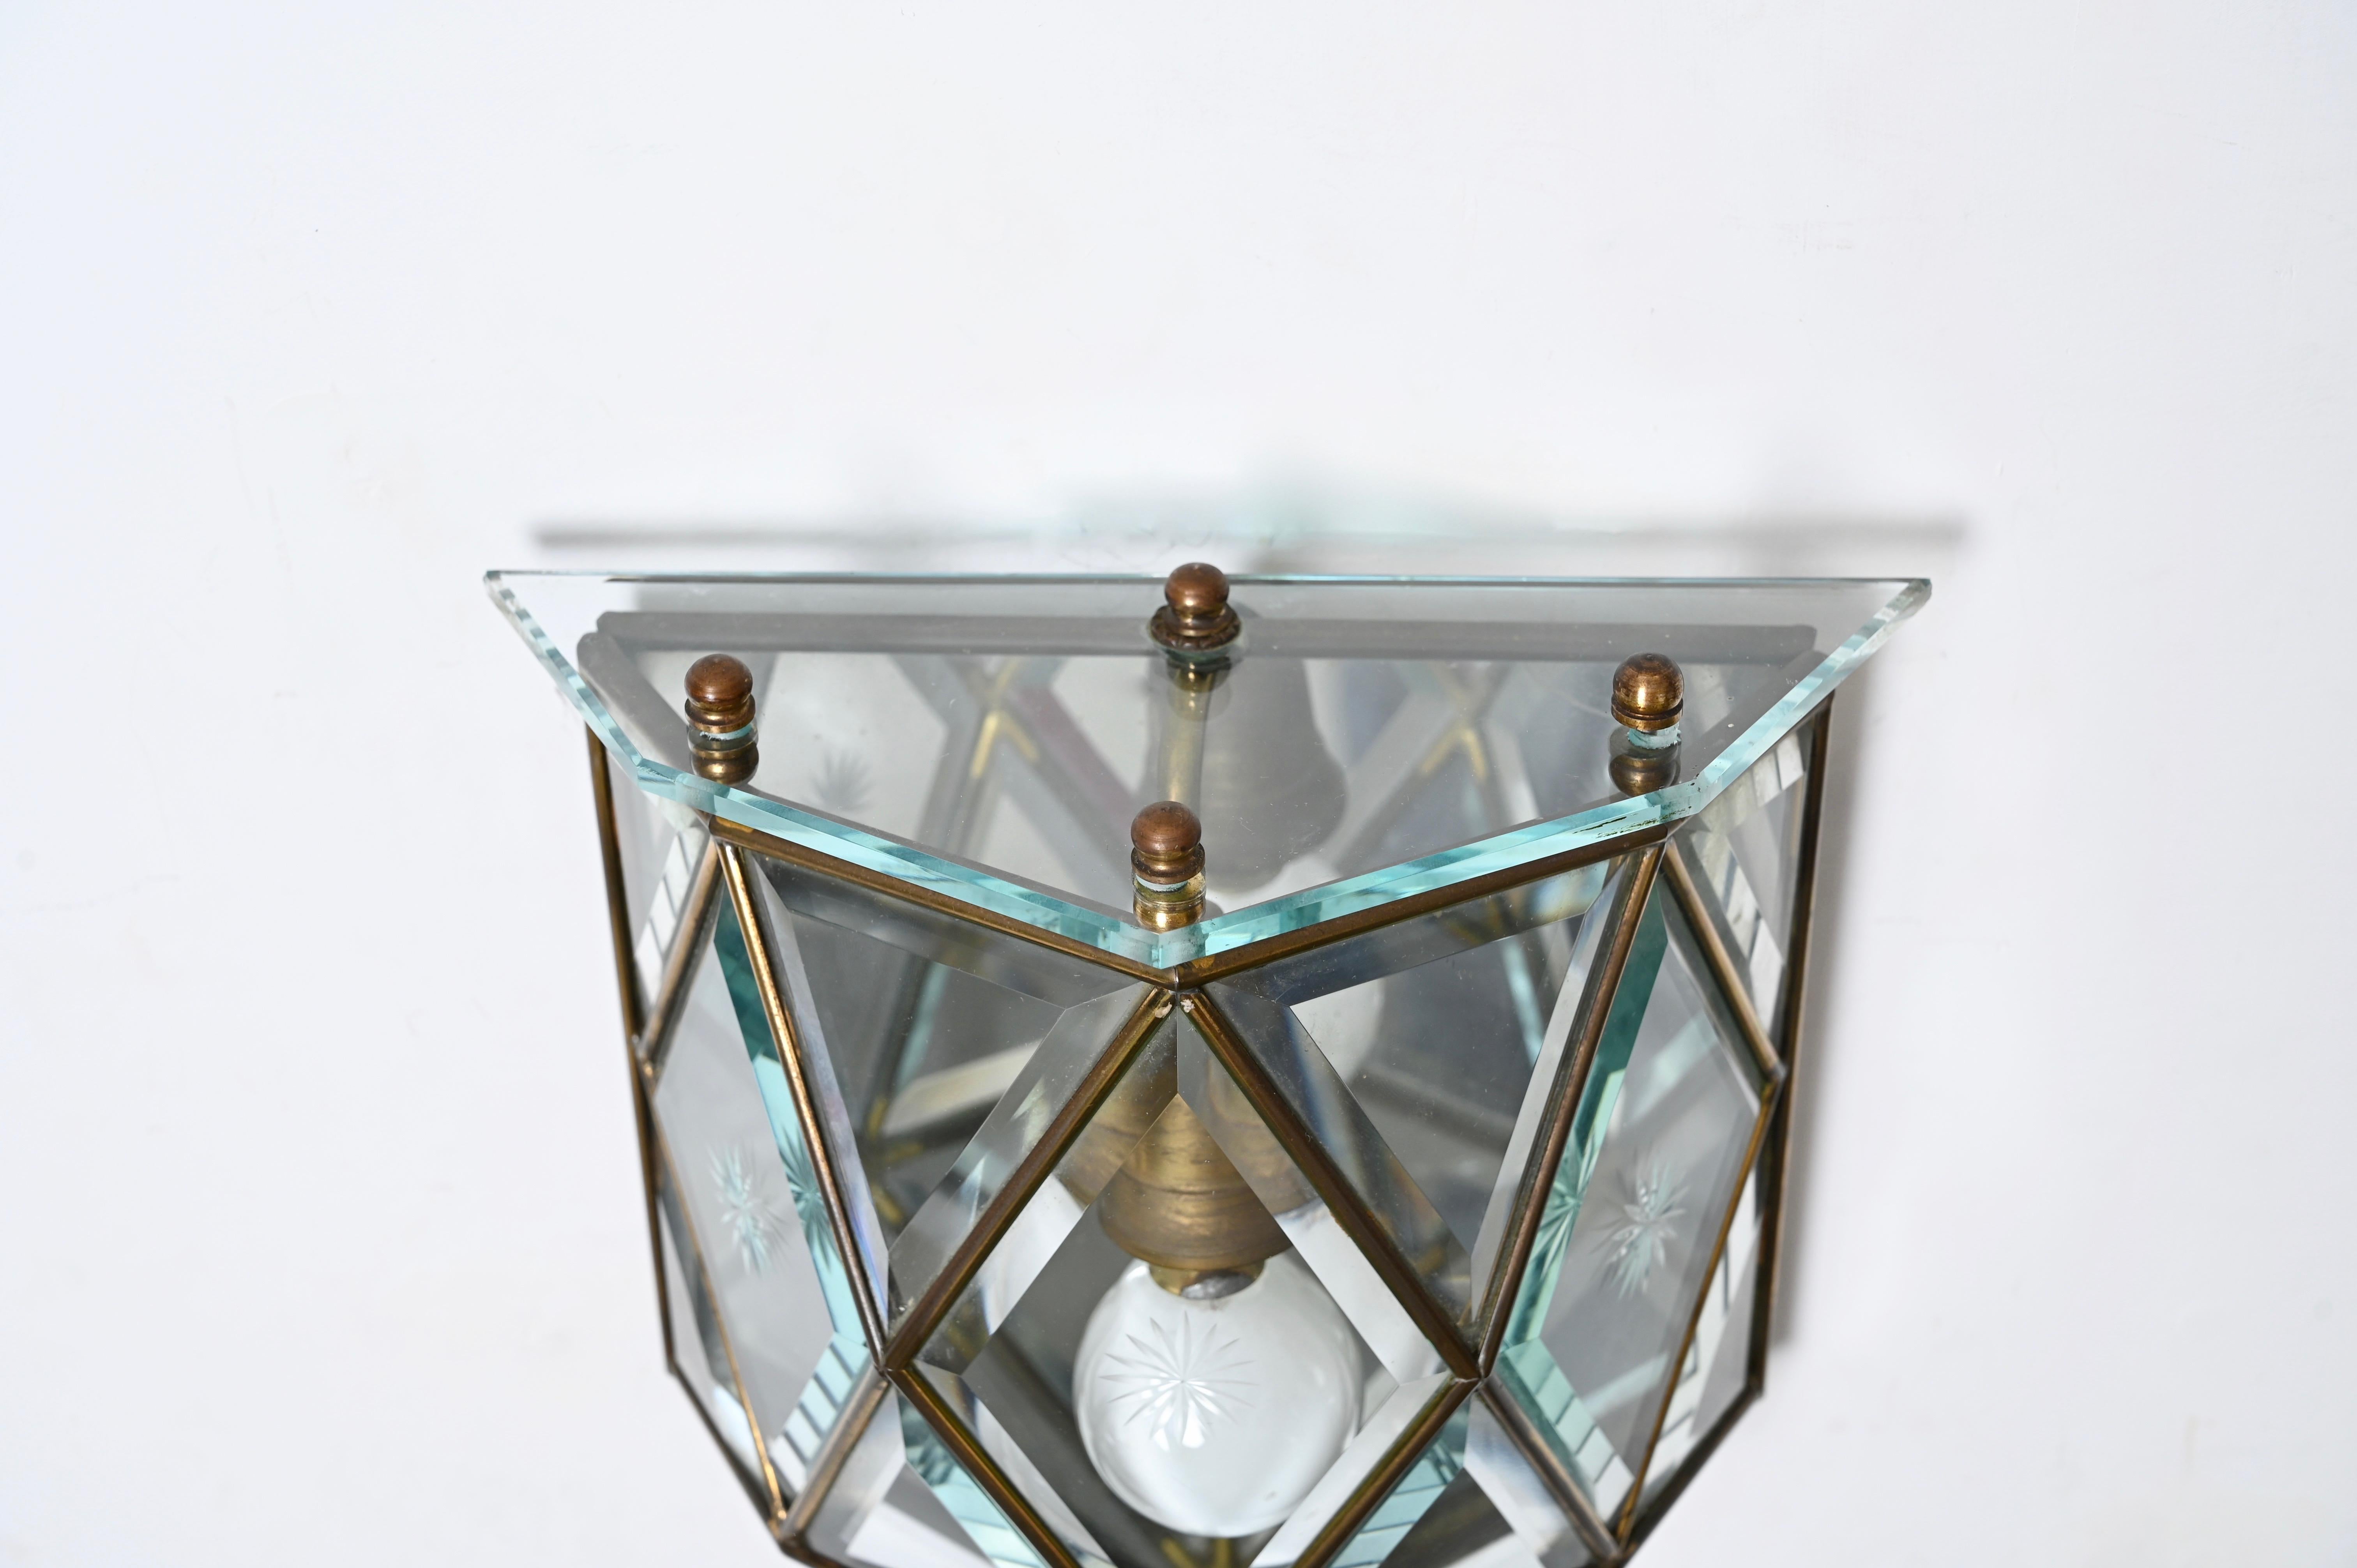 Fontana Arte Pair of Sconces in Beveled Glass, Brass and Mirror, Italy, 1940s For Sale 9